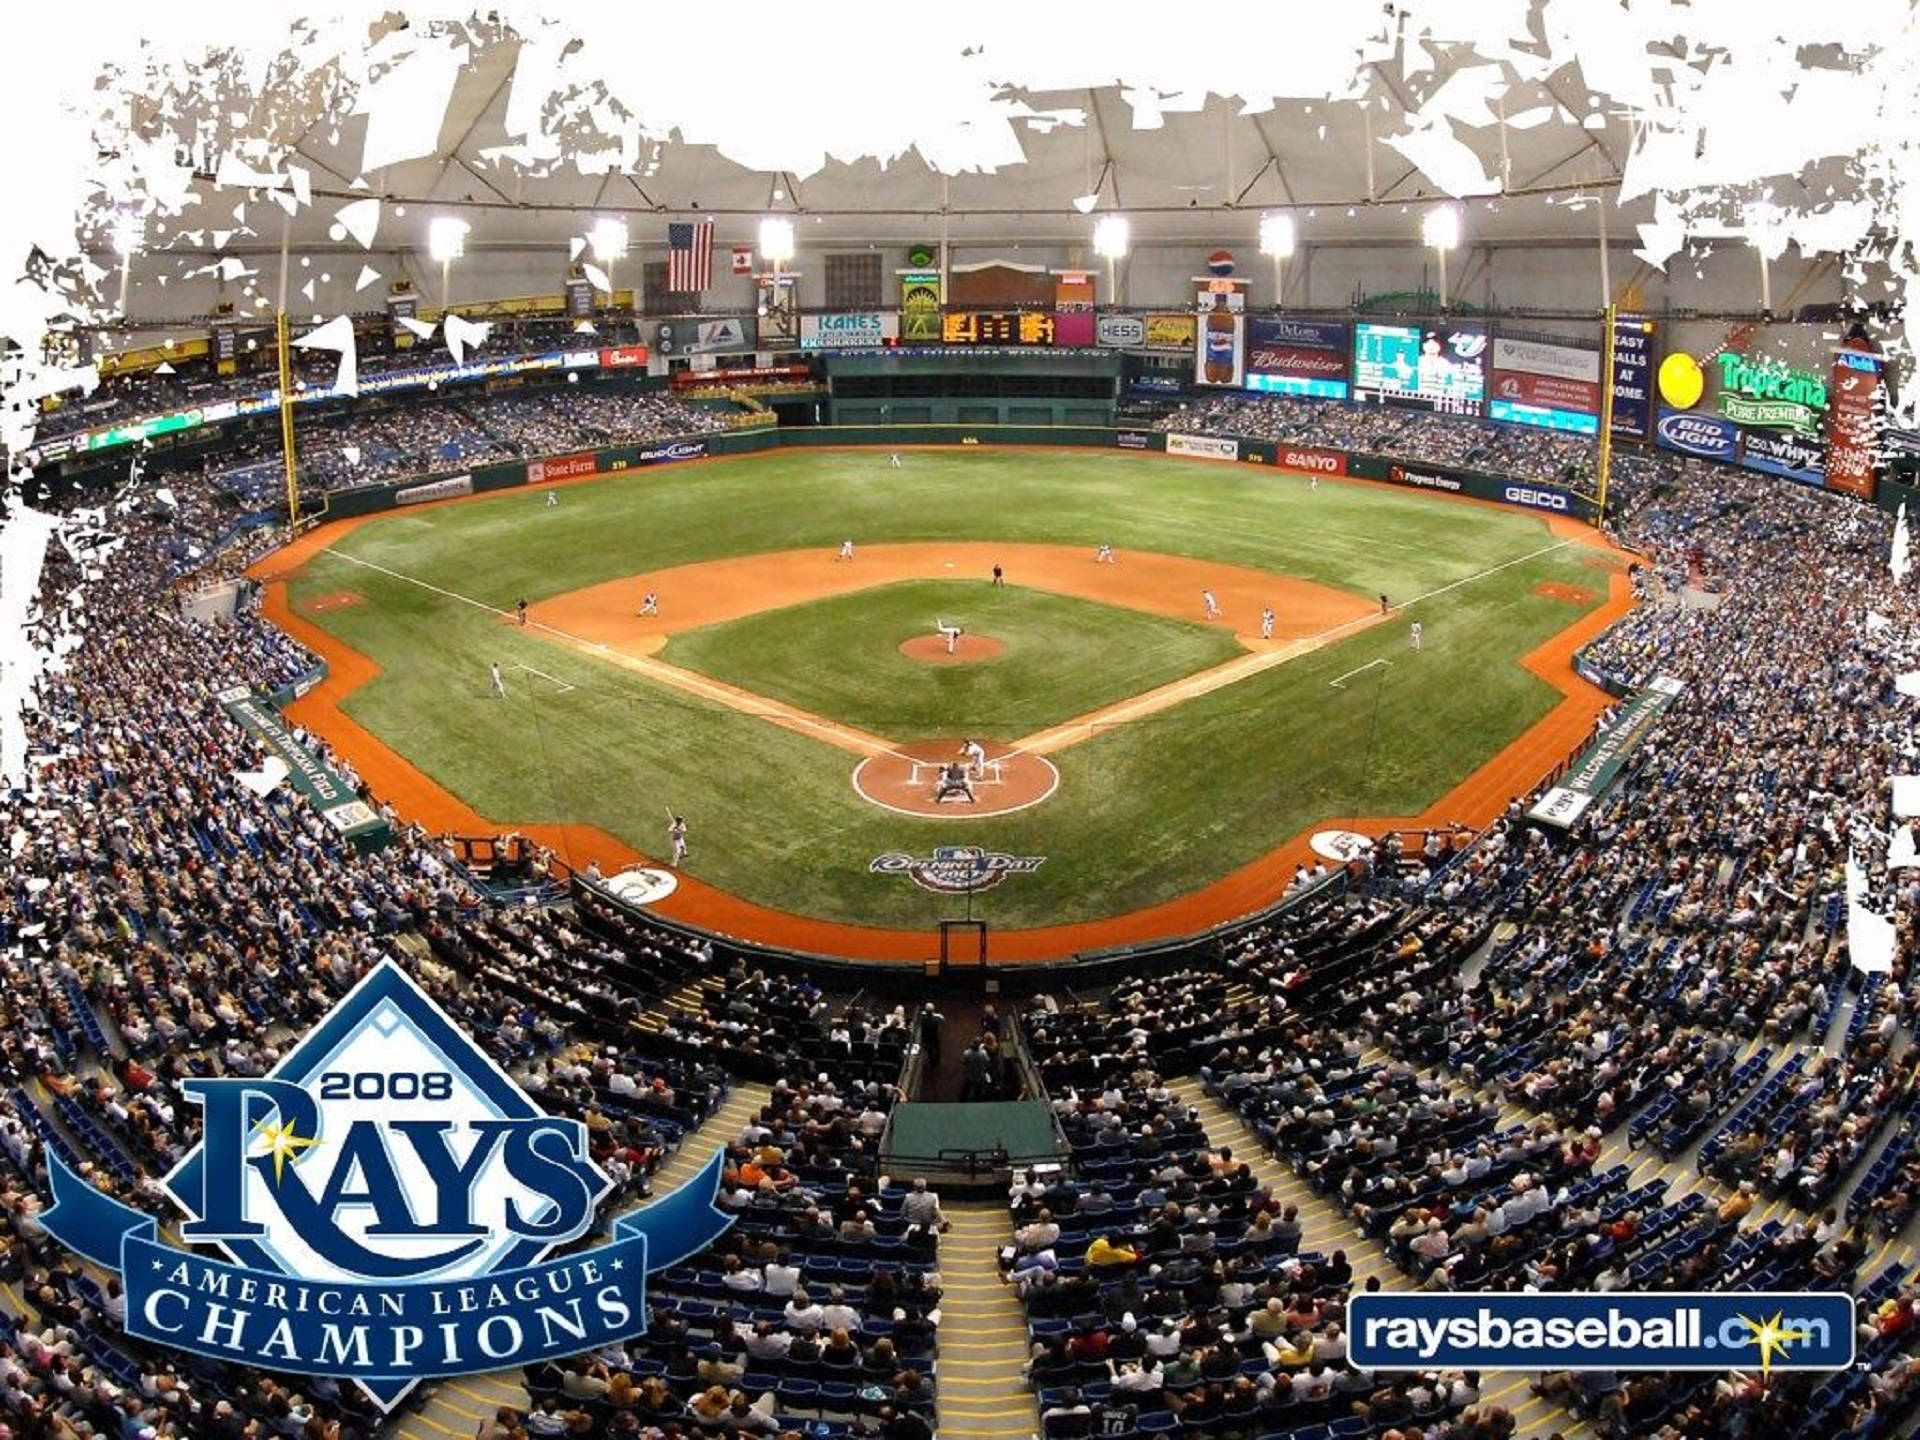 Tampa Bay Rays League Champion Poster Background